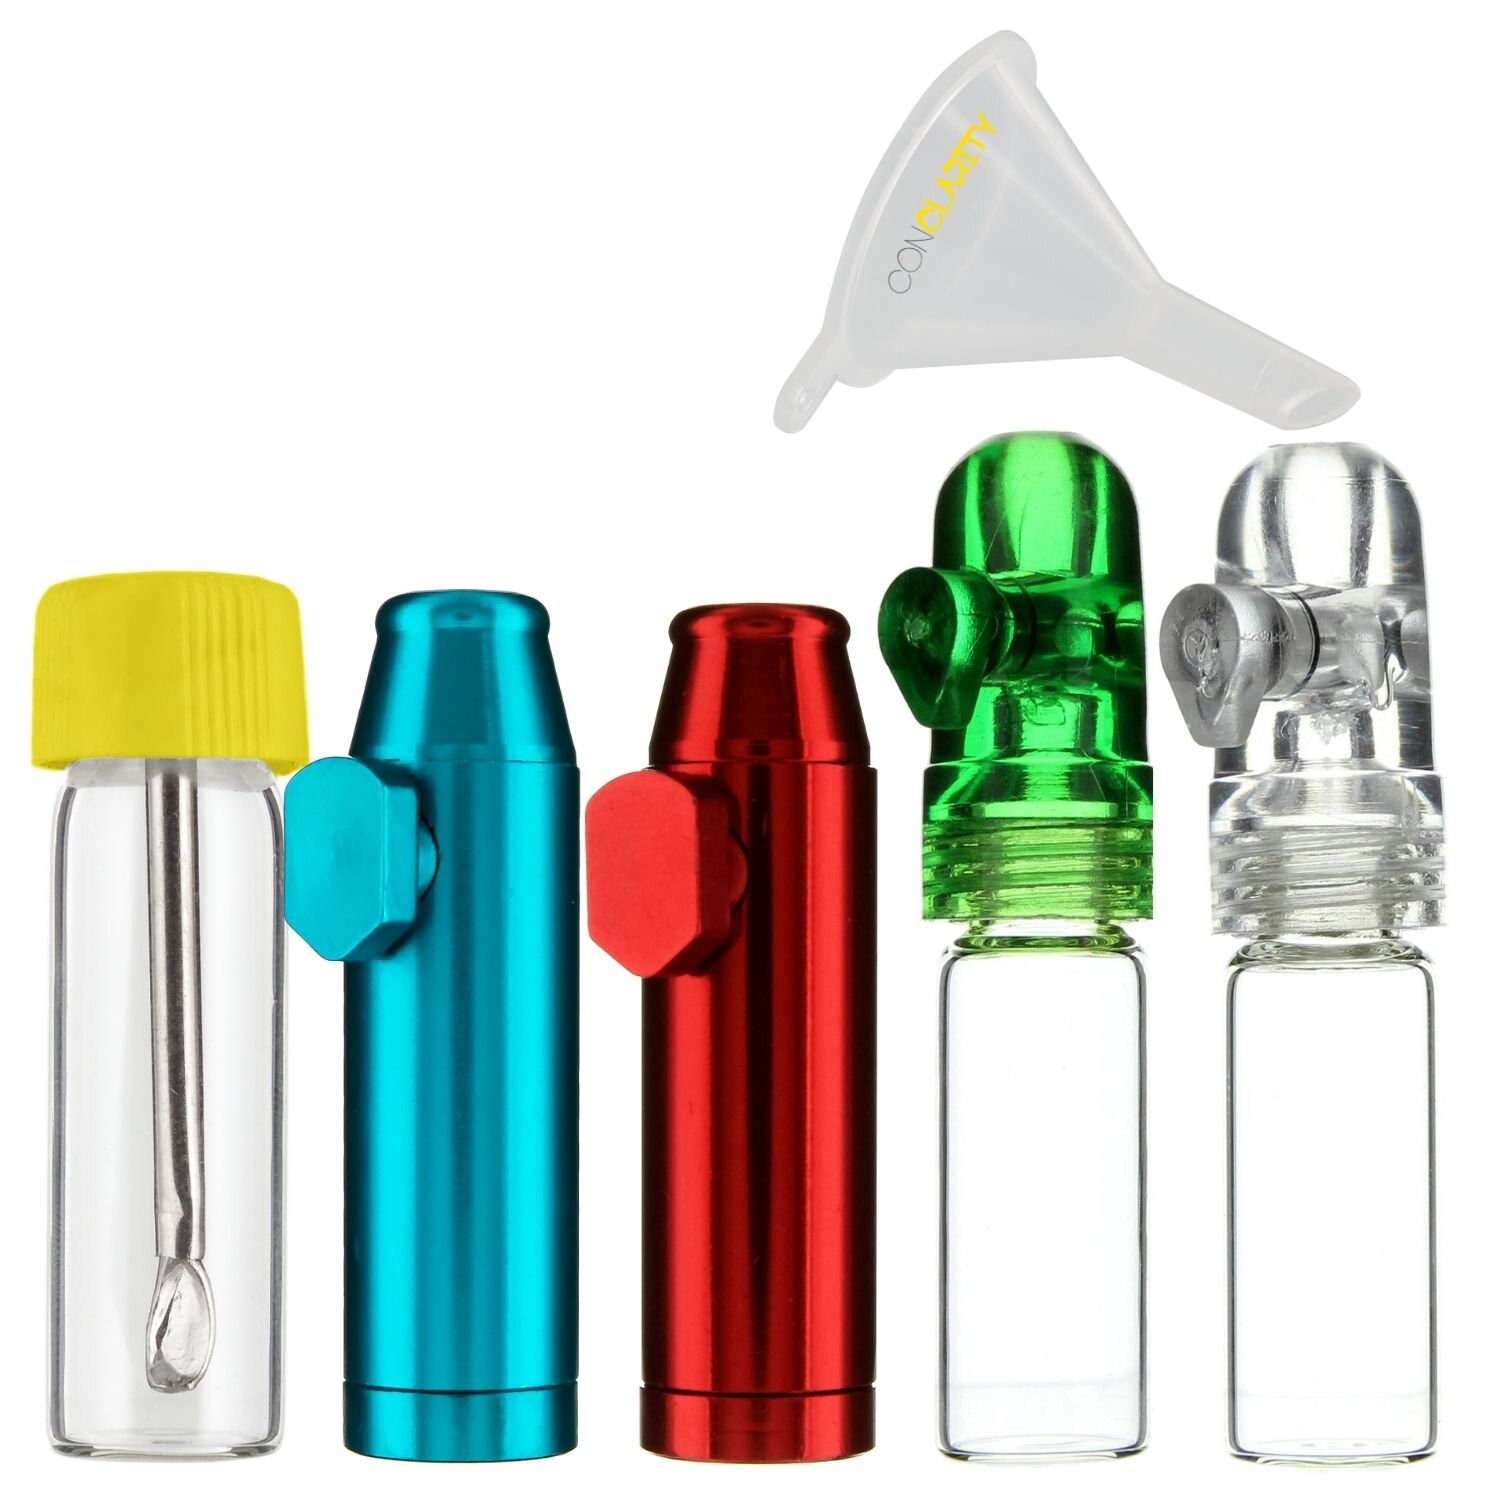 4 Pack Snuff Bullets Snuff Bottle with Spoon Inside with DmHirmg Micro Funnel Snuff Snorter Dispenser Bullet Snuff 43MM Height 4Pack 